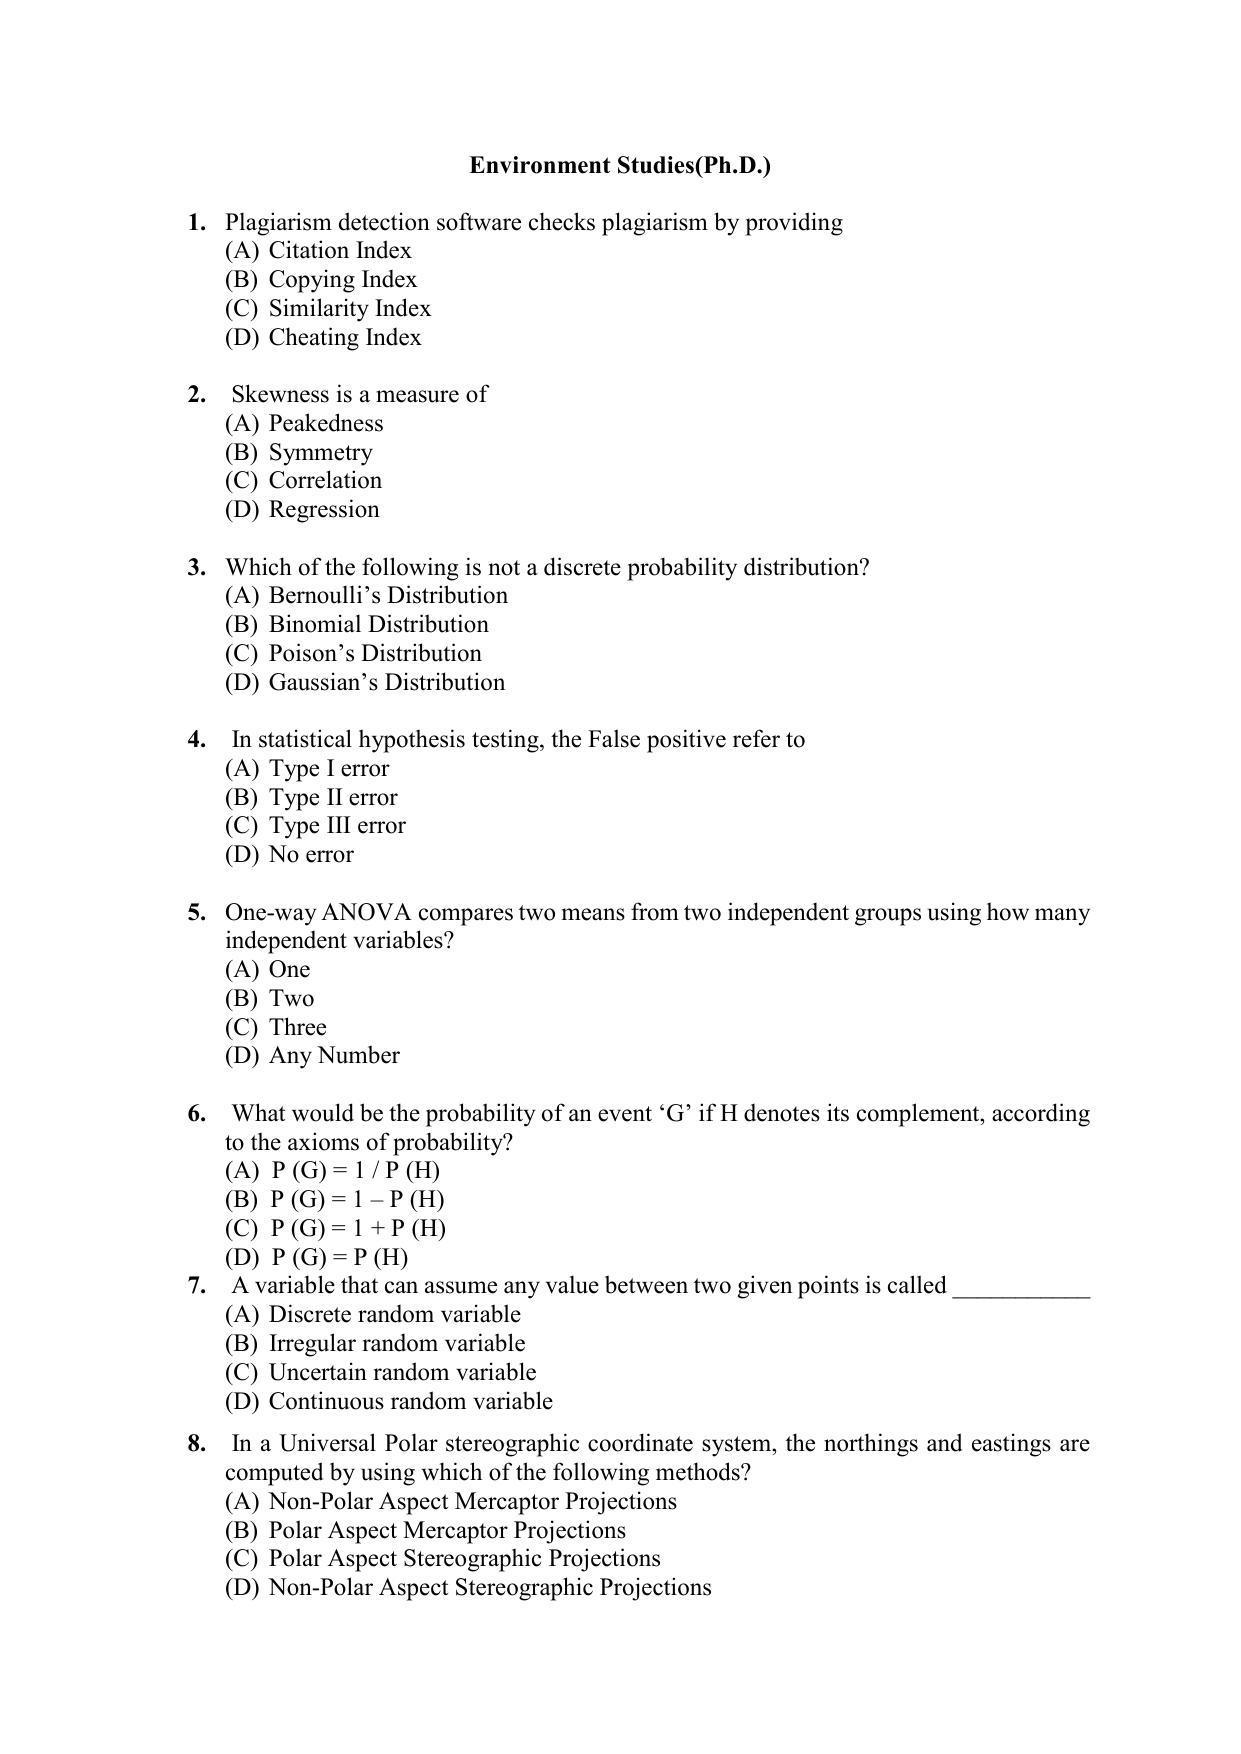 PU MPET Anthropology 2022 Question Papers - Page 24